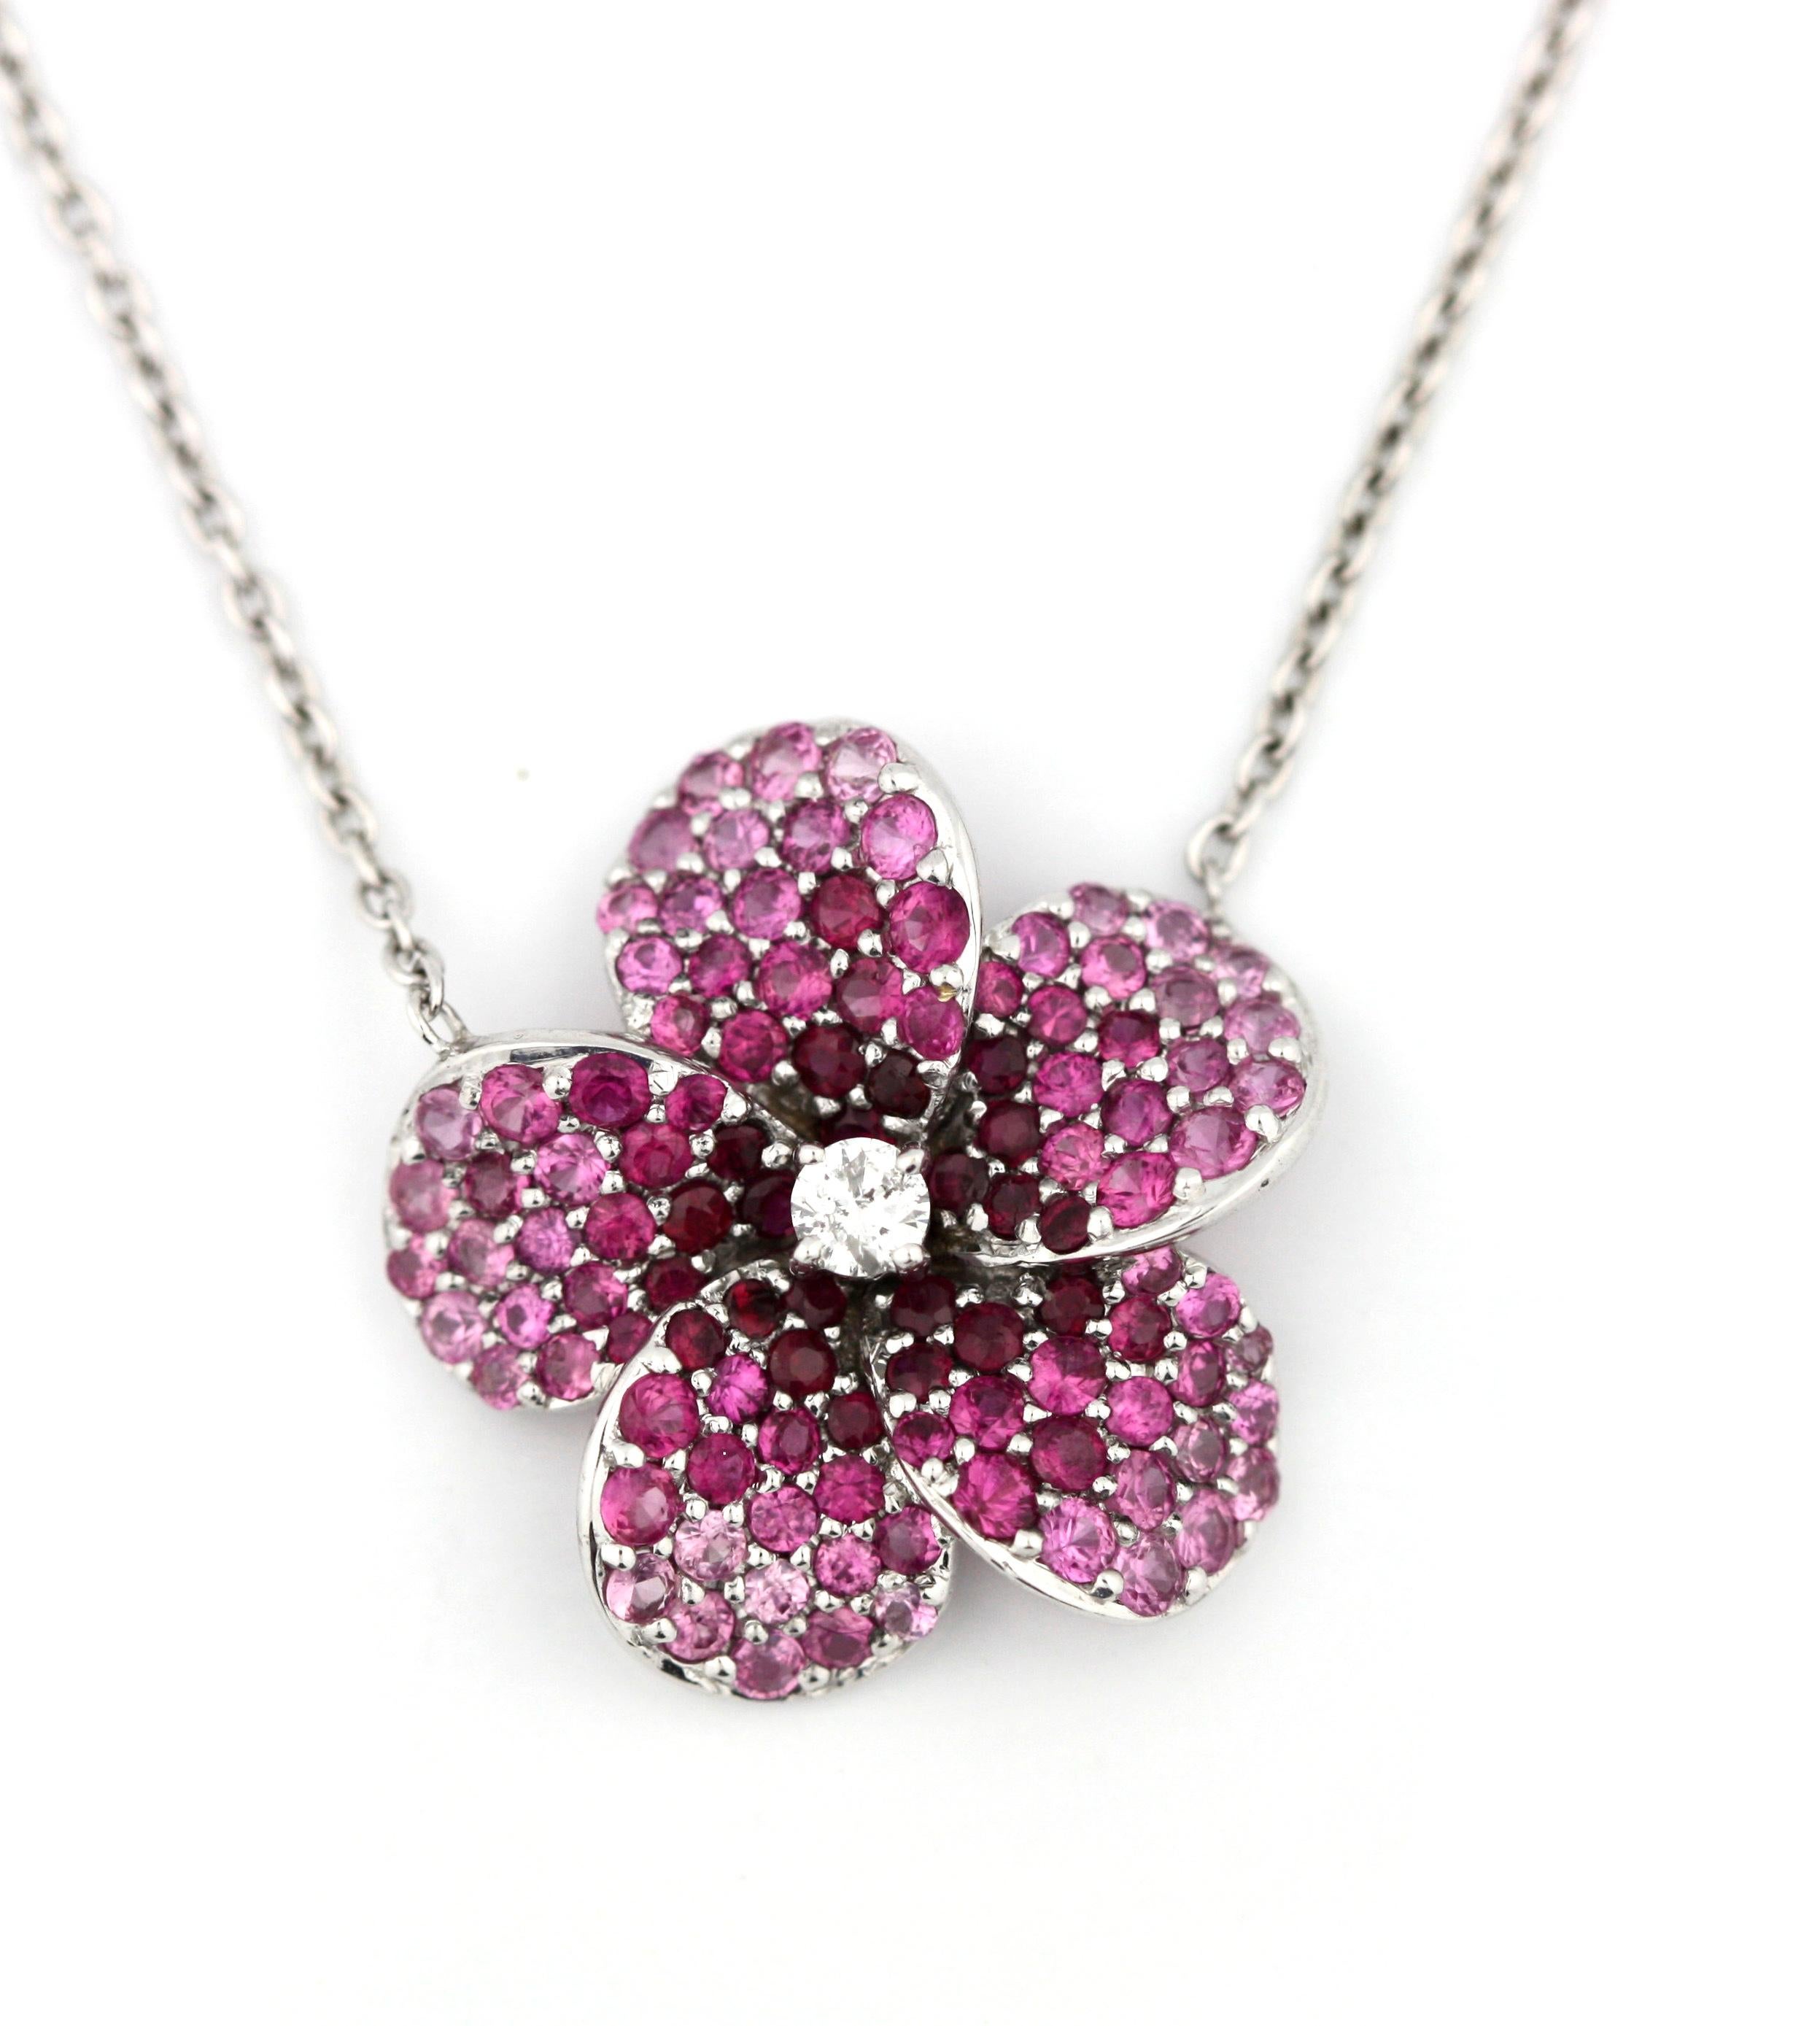 Ruby and Diamond Pendant-Necklace
Of flower design, centering a single-cut diamond, accented by rubies, completed by a white gold chain. Rubies weighing approximately 1.86 carats
Length 18 inches, 18 karat white gold
Condition Report
In good